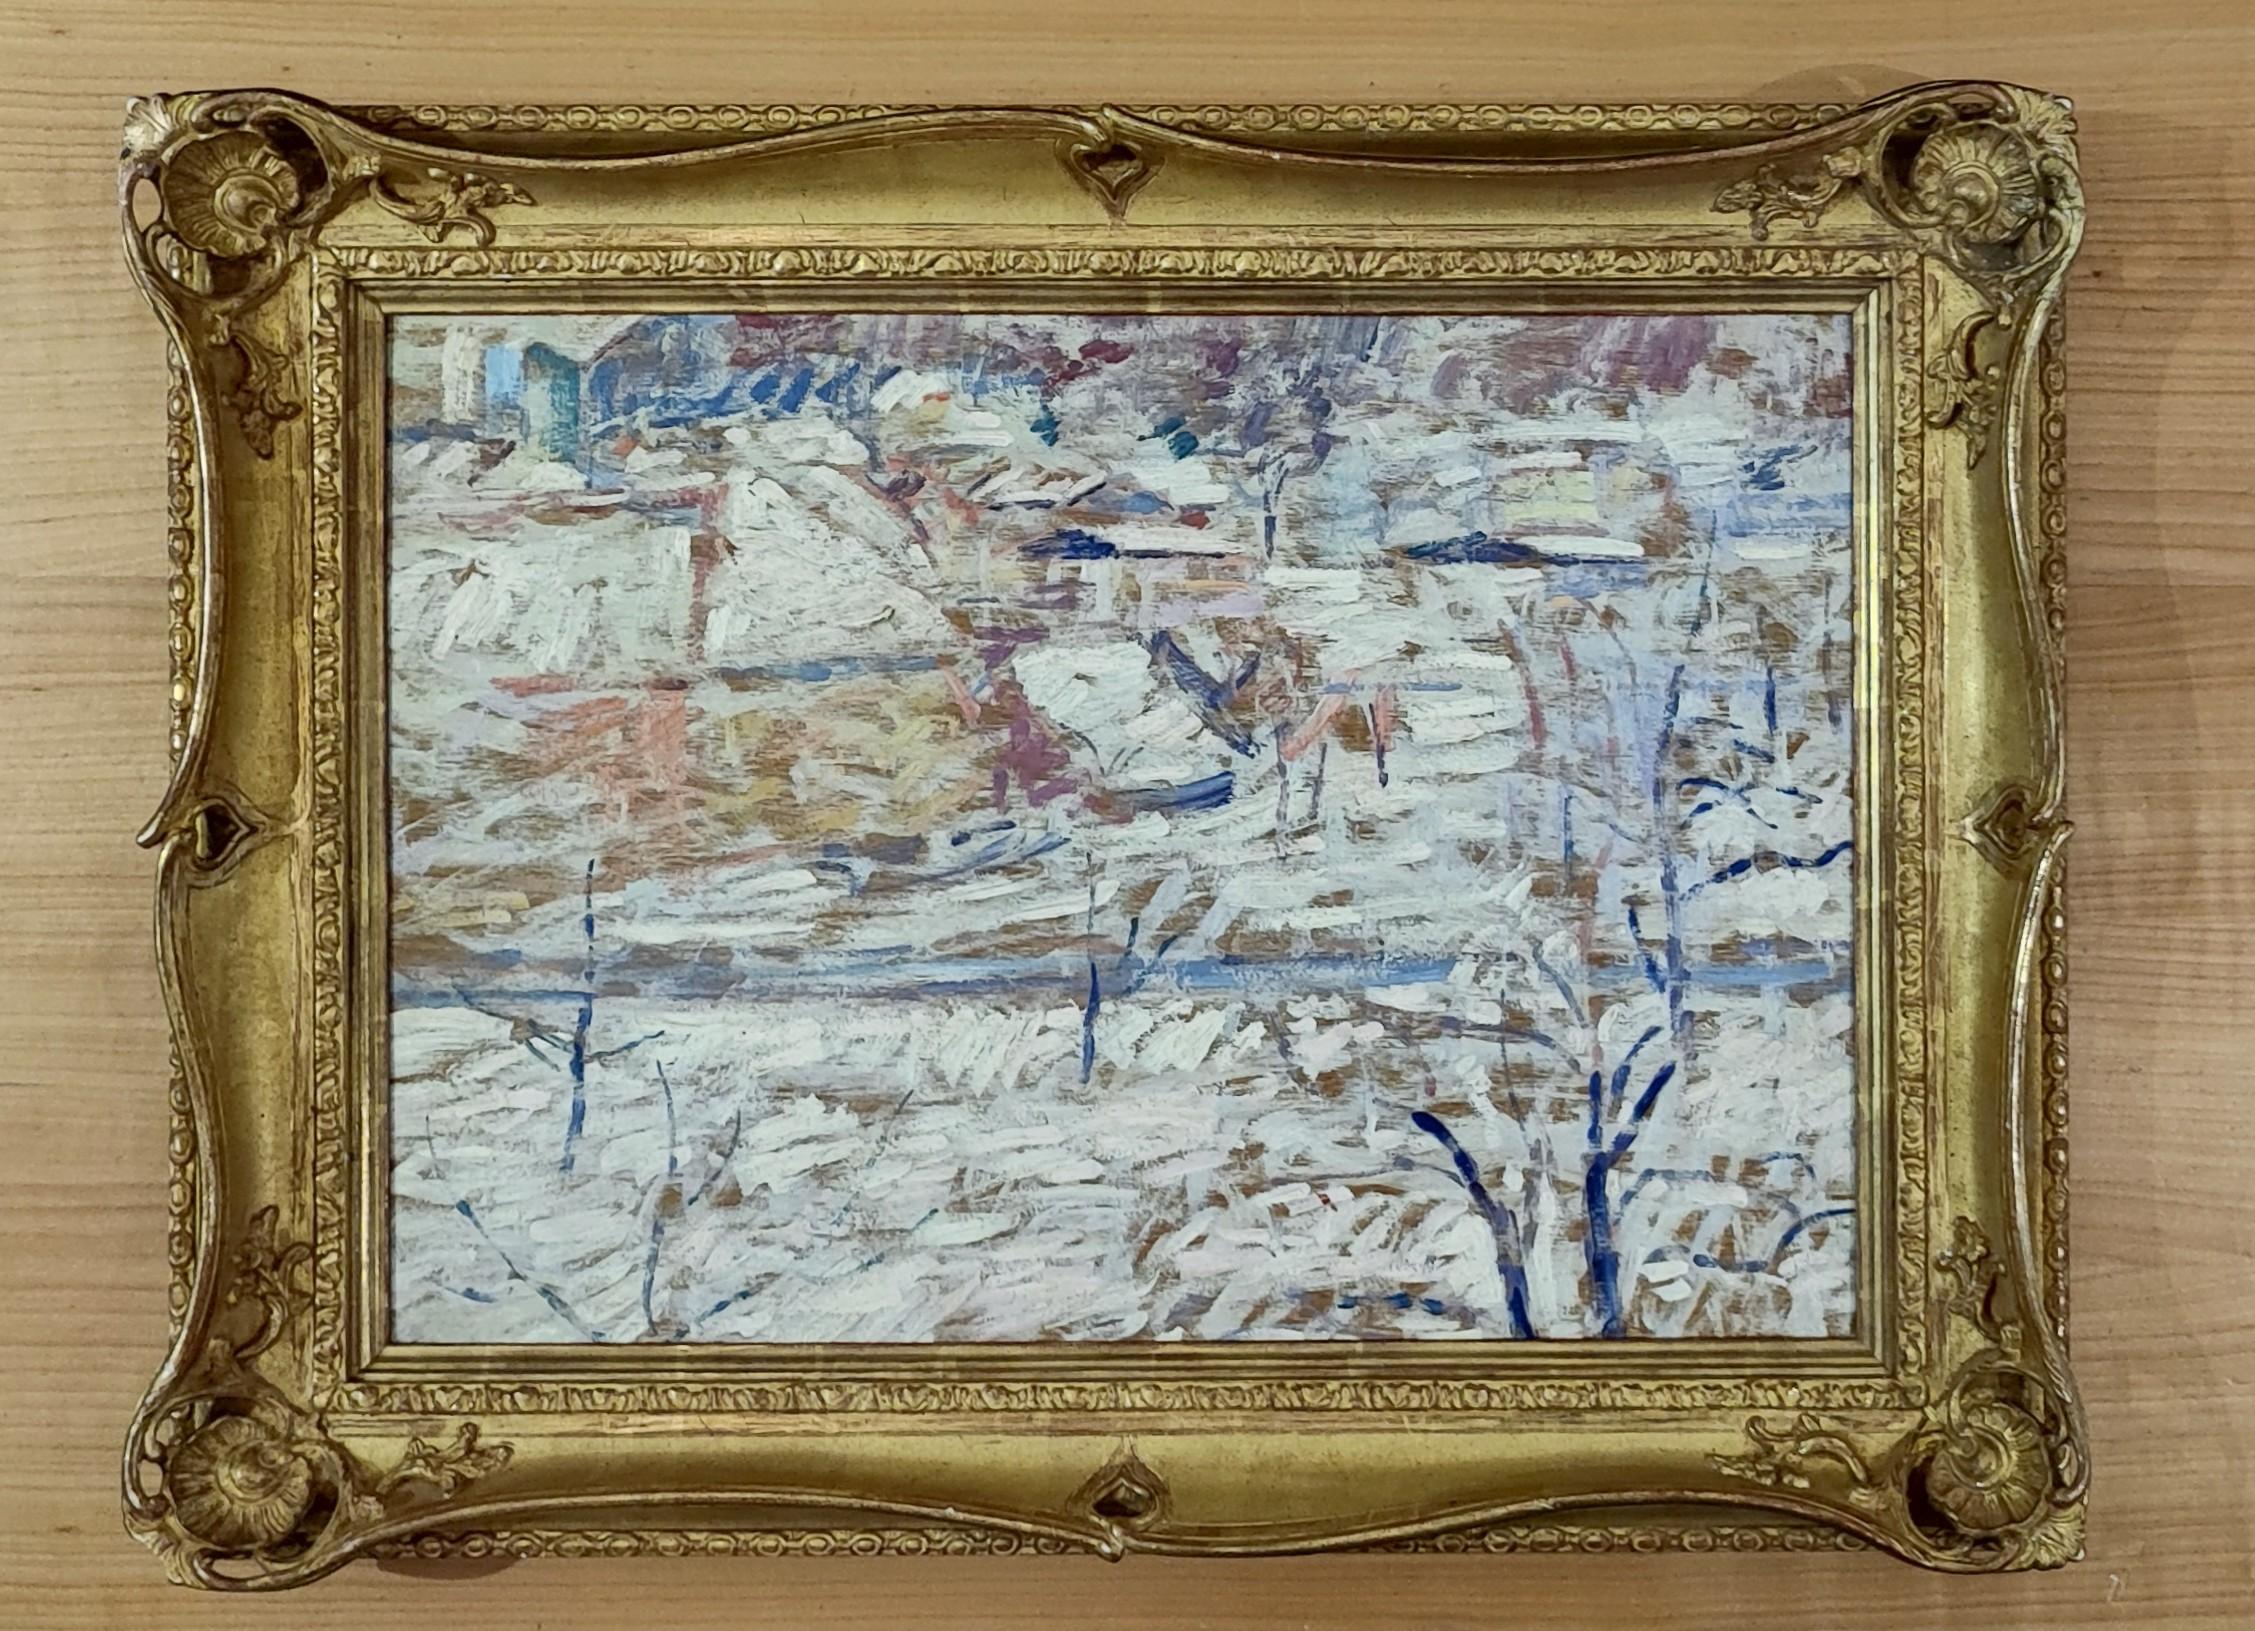 Snowy landscape - Painting by Unknown